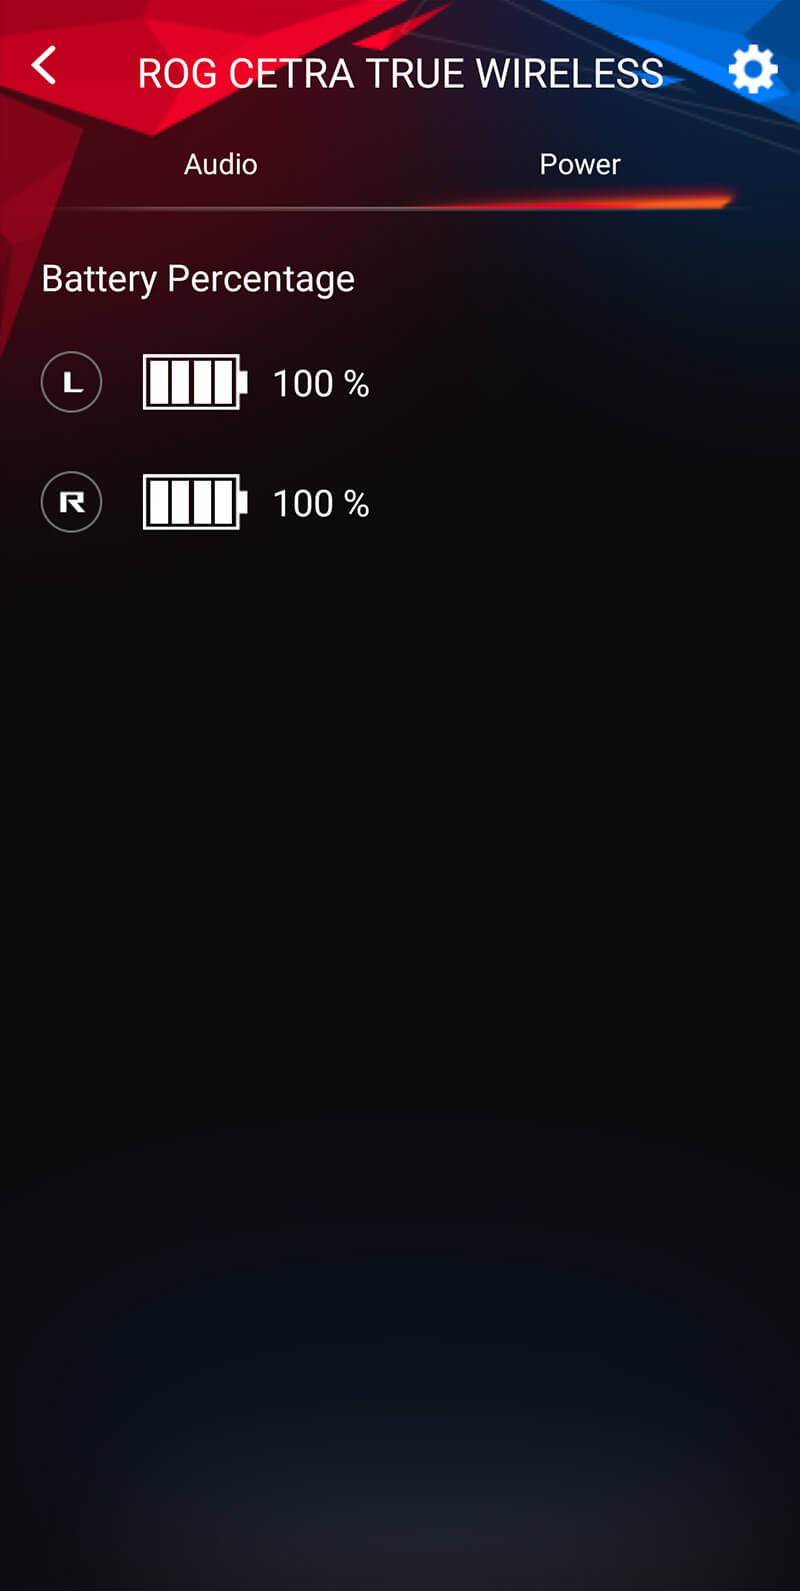 A screenshot of the Armoury Crate App where you can optimize audio performance via different settings